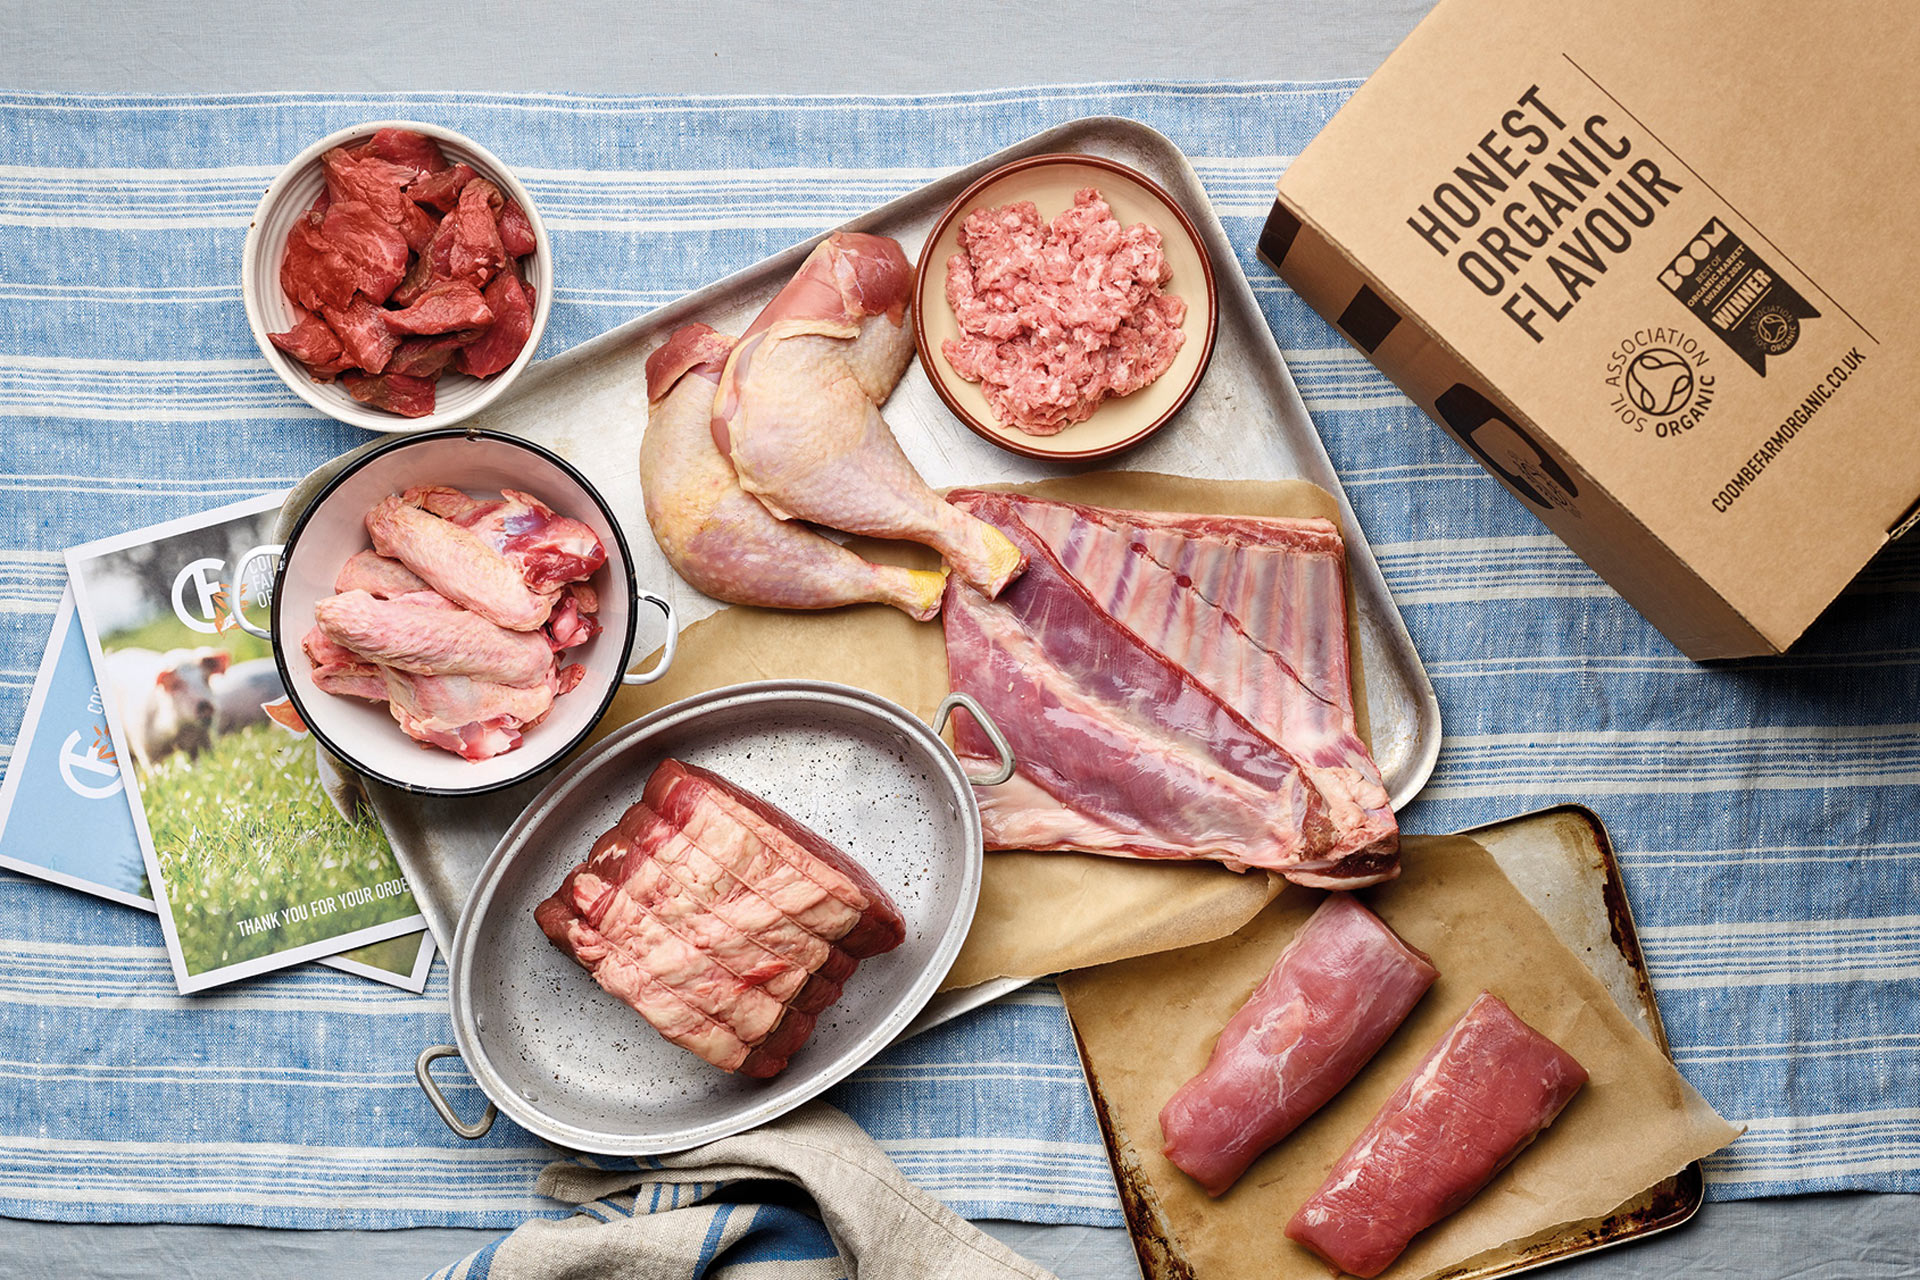 Coombe Farm Organic Is Somerset's Online Organic Butcher - Food & Drink